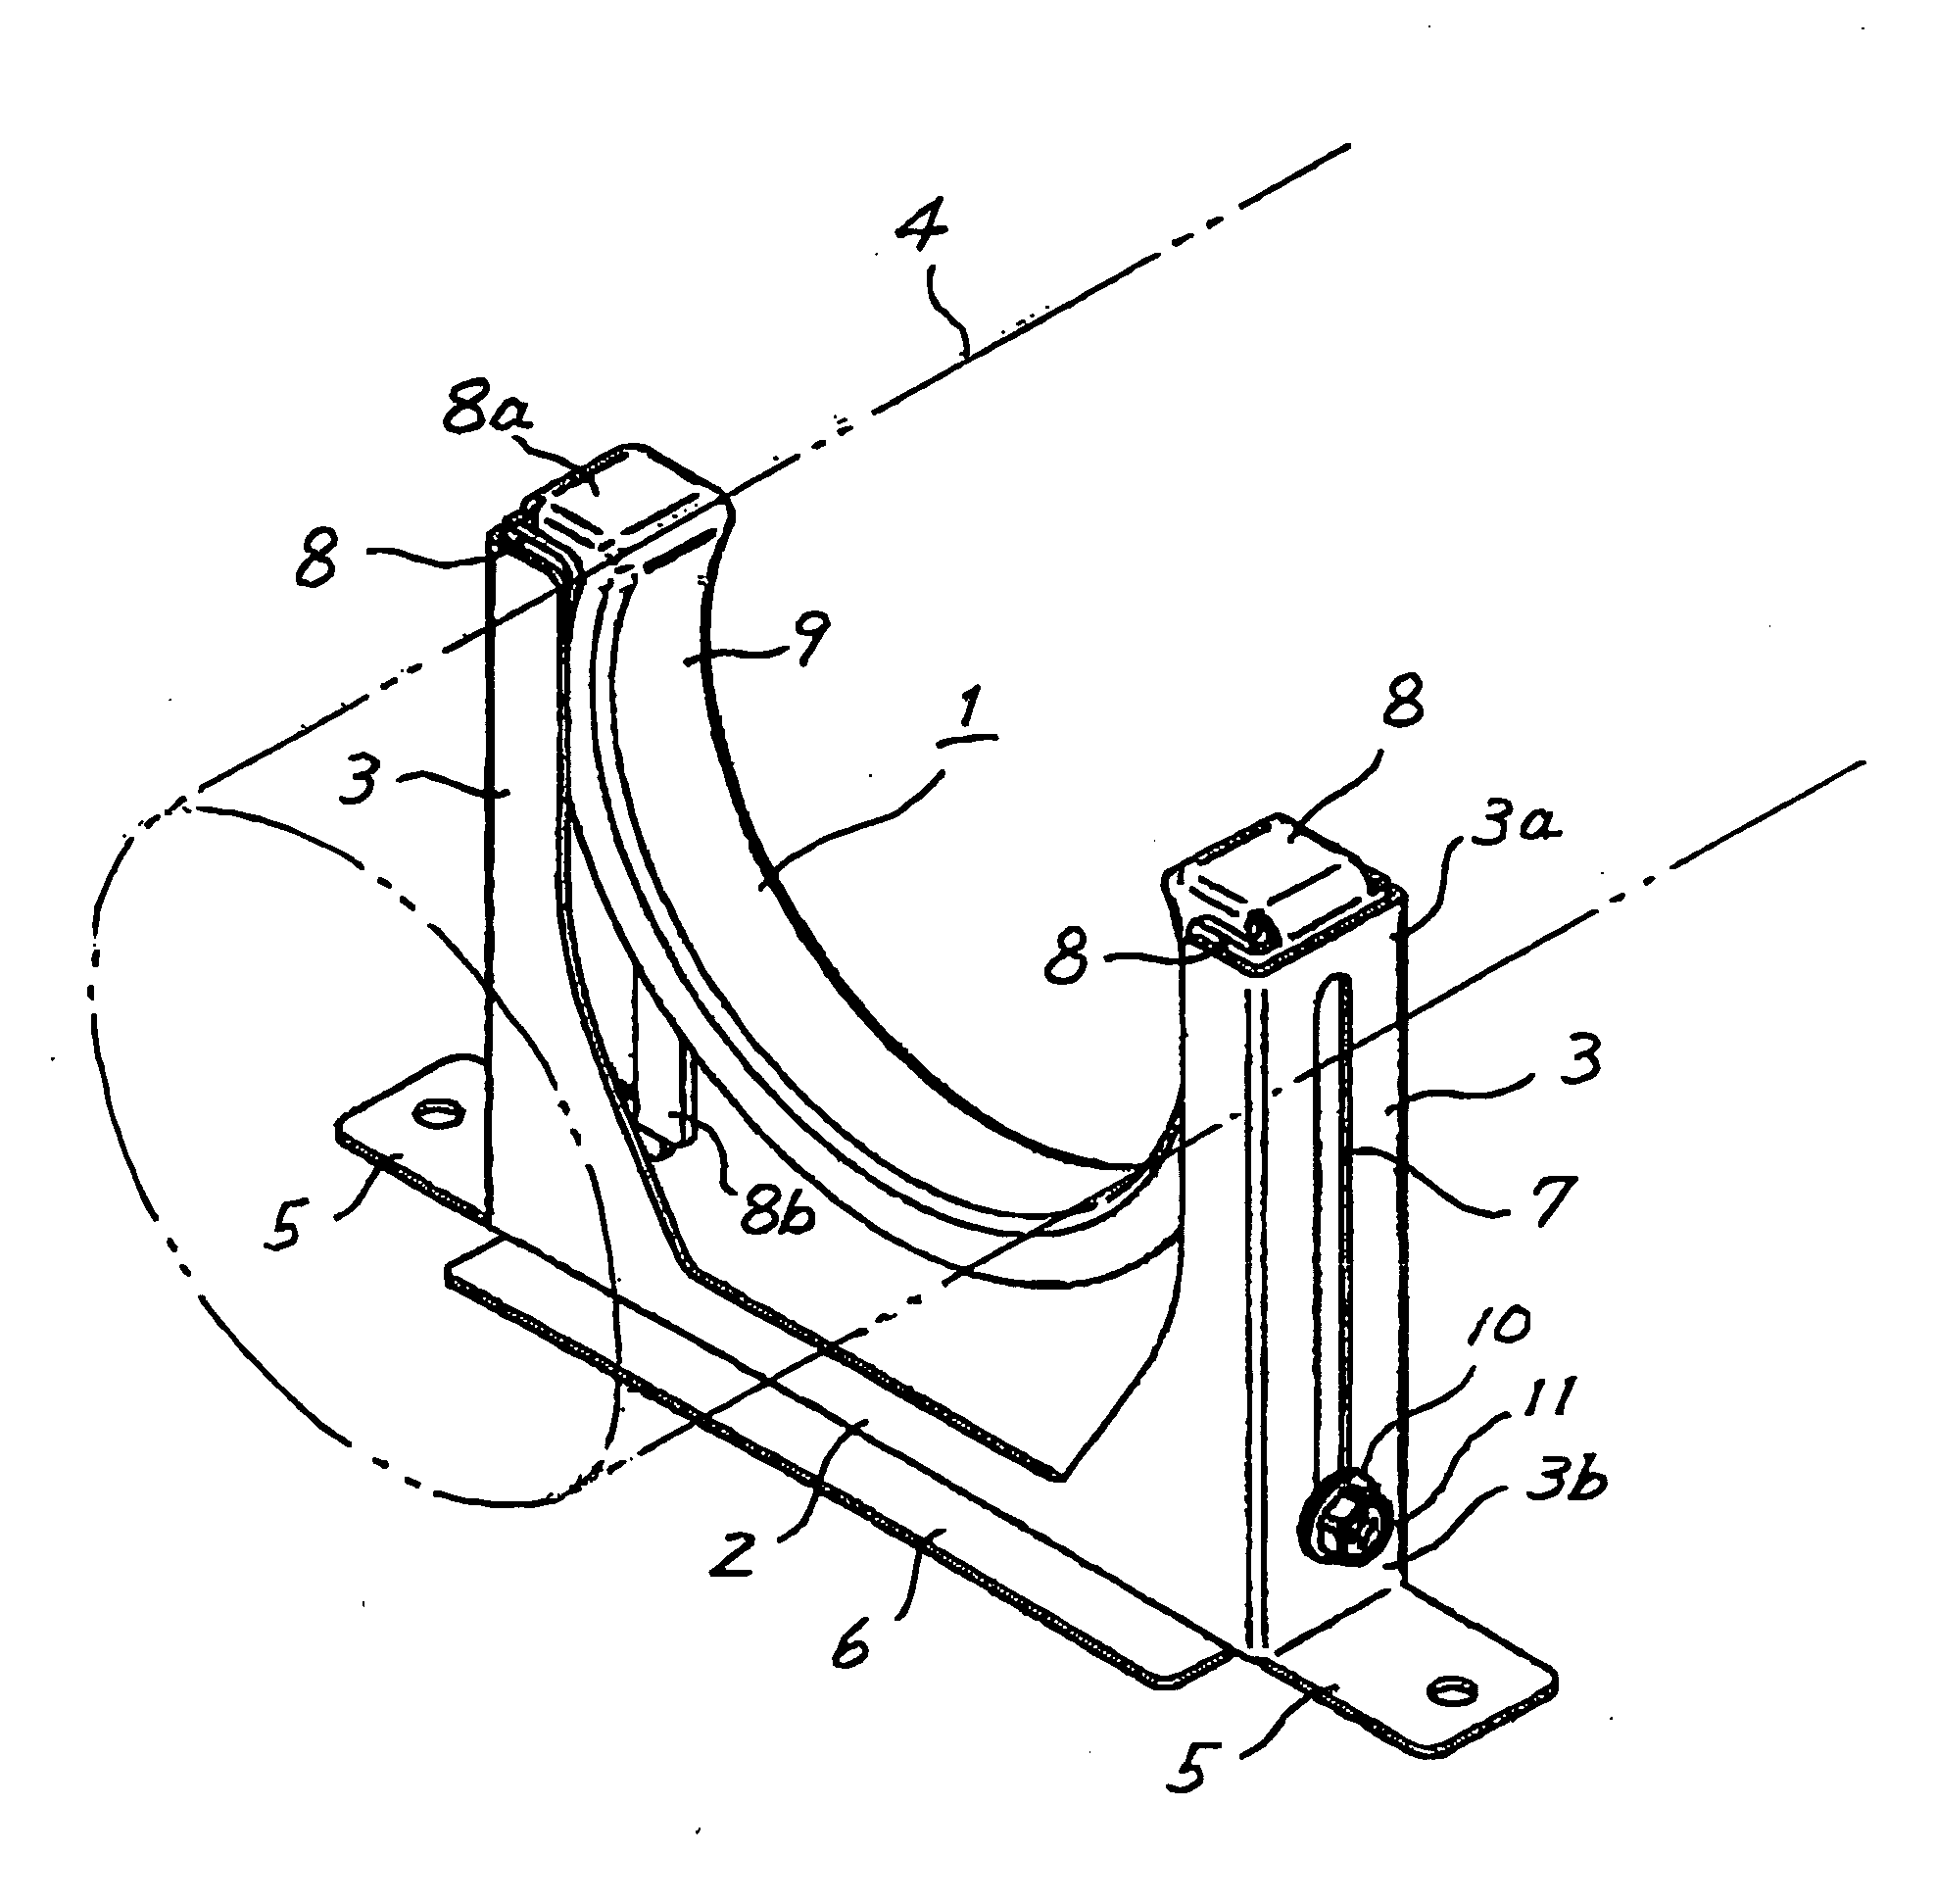 Vertically adjustable pipe support apparatus